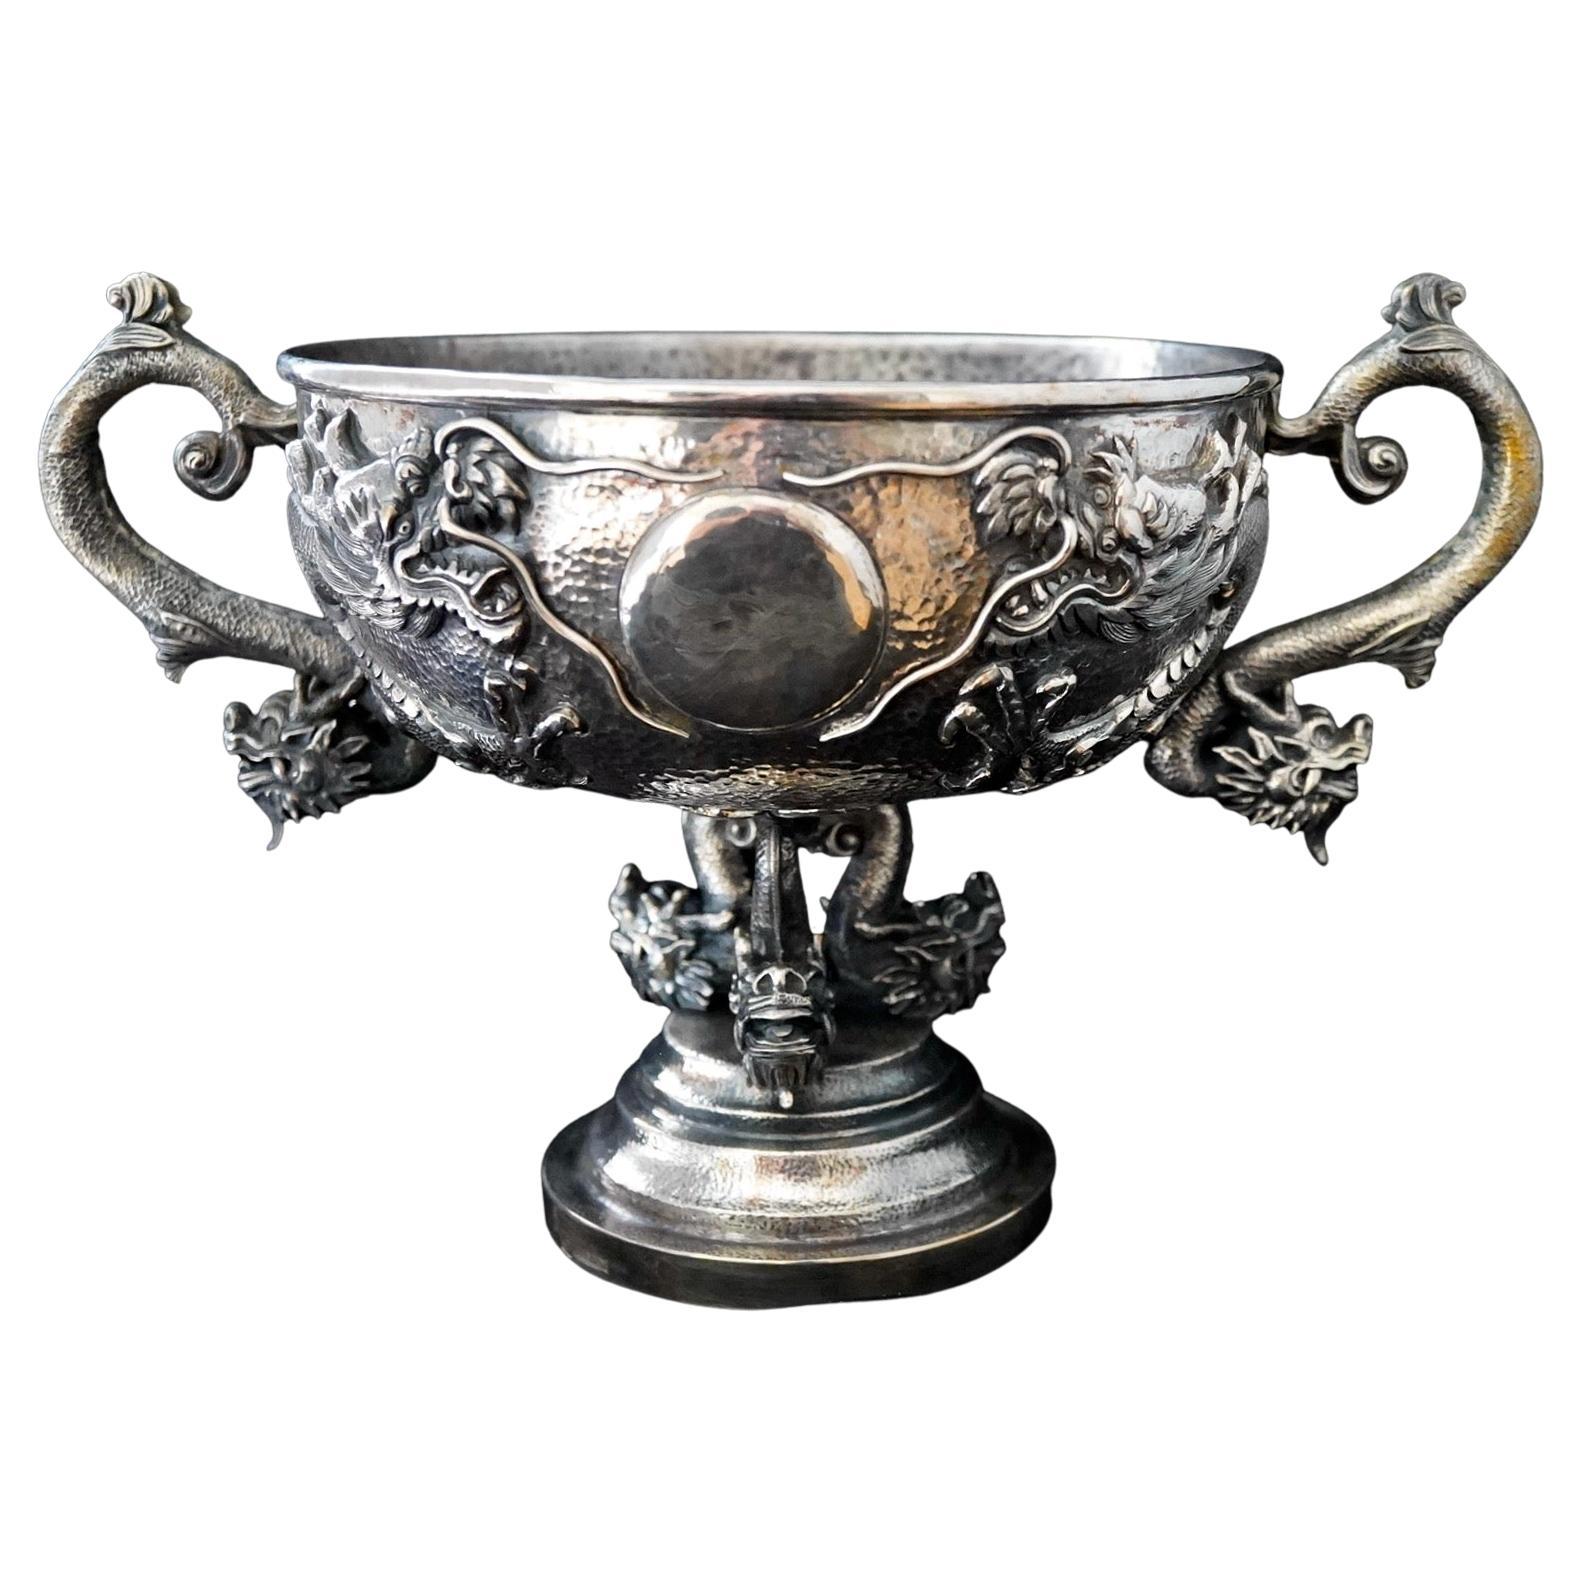 Chinese Export Silver Dragon Repousse Centerpiece